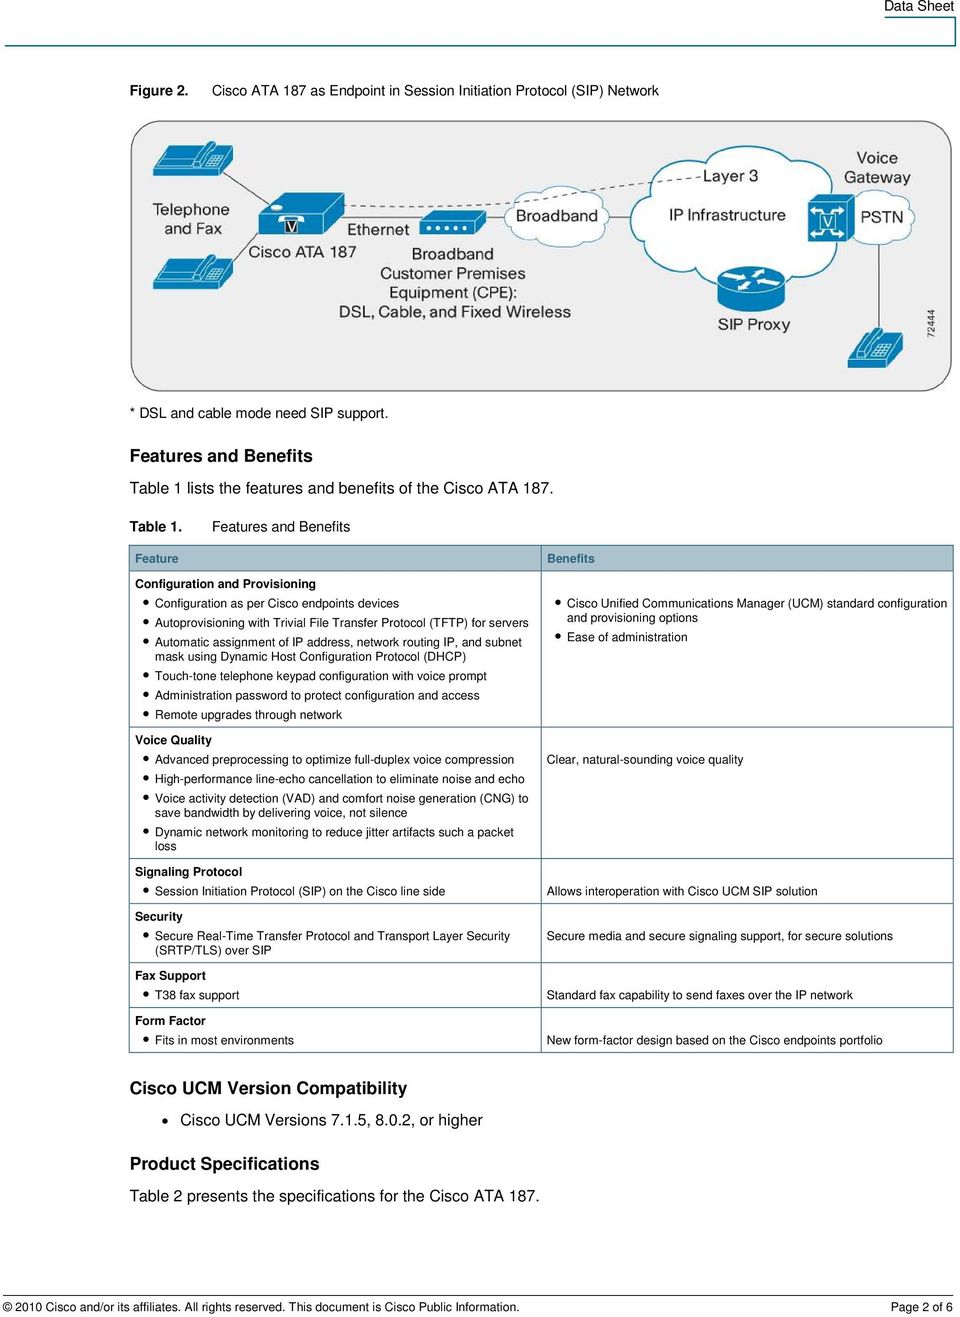 lists the features and benefits of the Cisco ATA 187. Table 1.